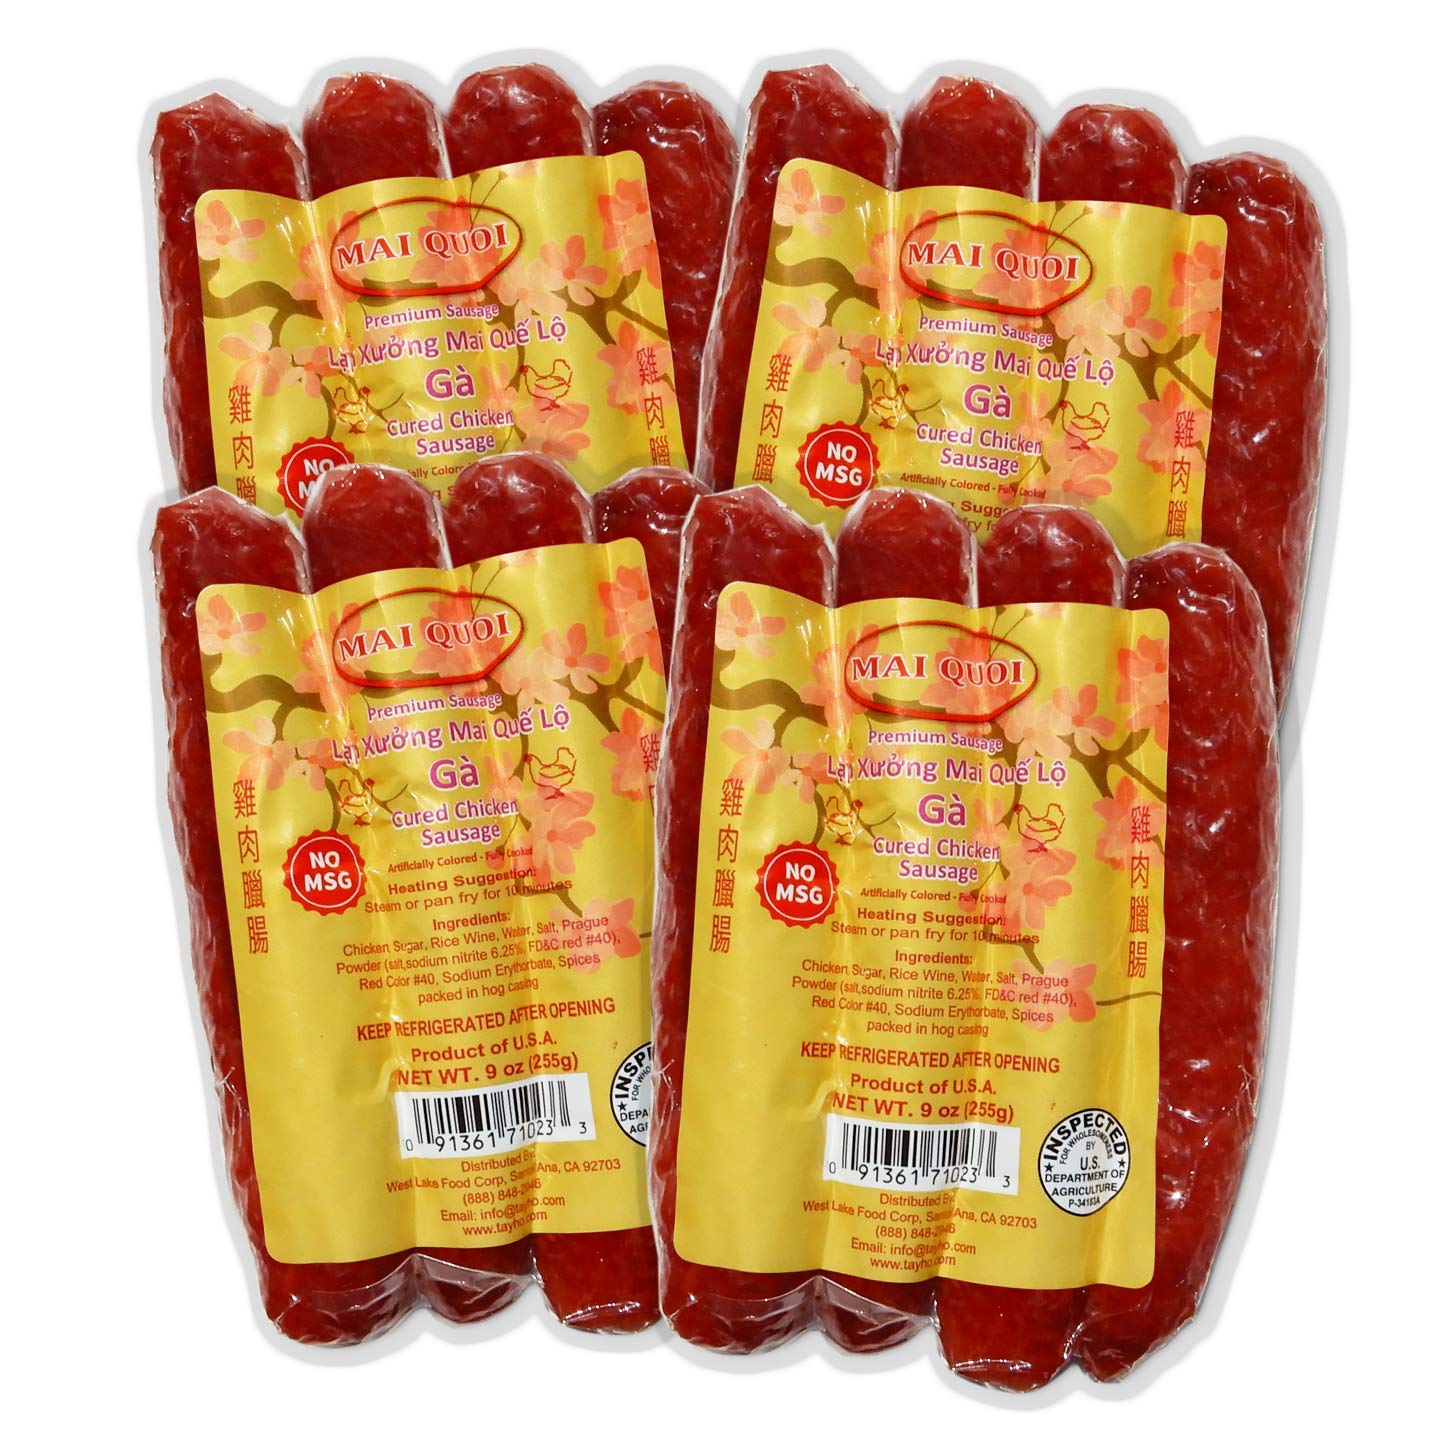 PREMIUM Chicken CURED SAUSAGE LAP XUONG GA (No MSG) Made in the USA